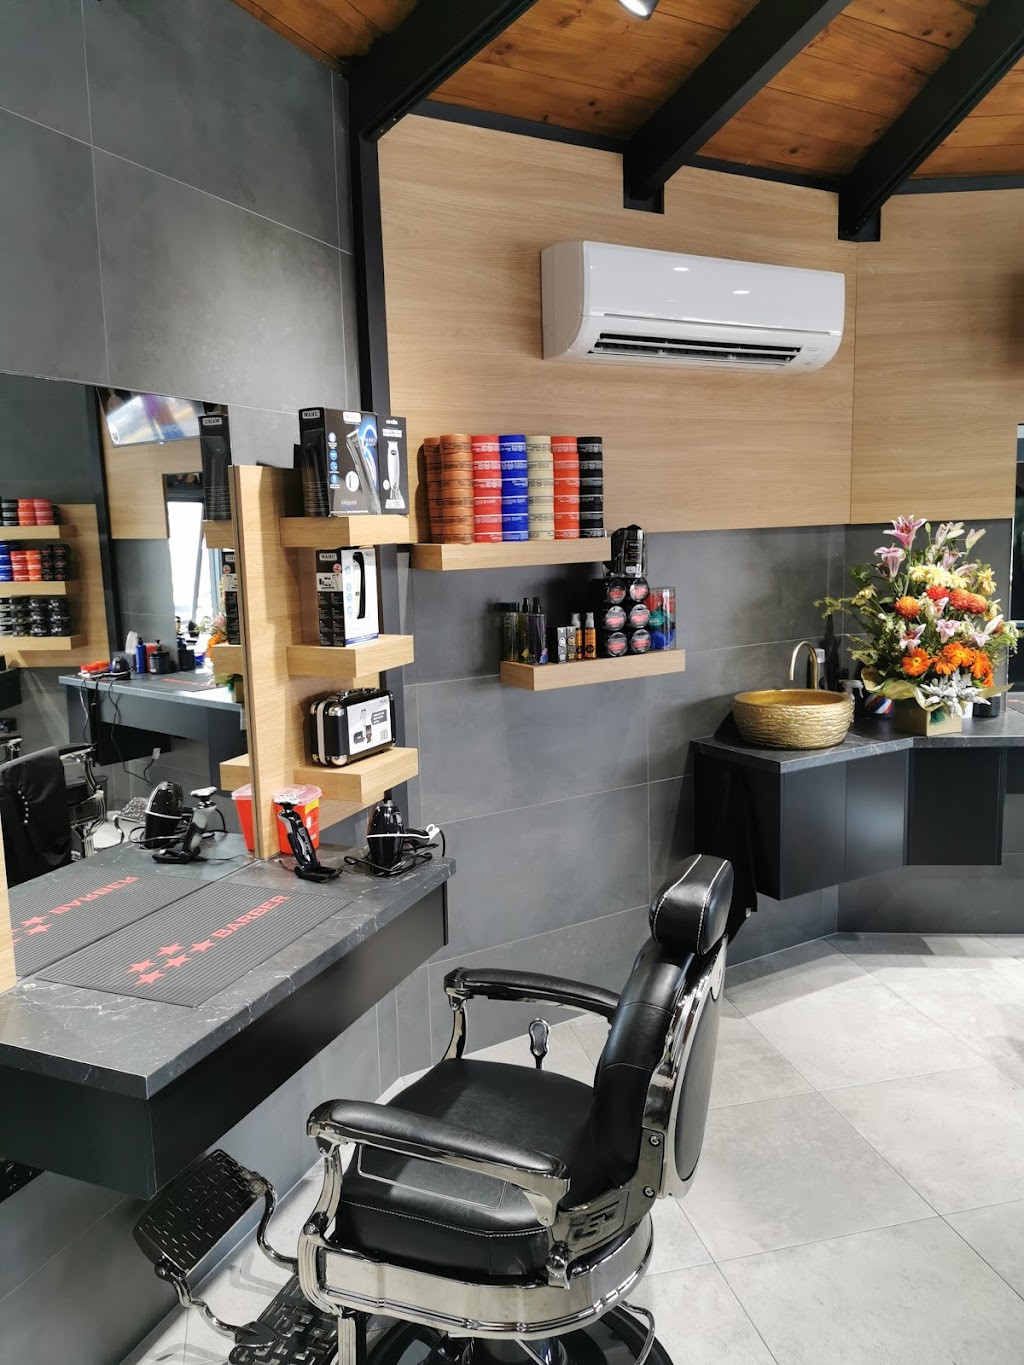 Cutting crew barber shop | hair care | Tra ding as crest HOTEL barber, 114 Princes Hwy, Sylvania NSW 2224, Australia | 0490063278 OR +61 490 063 278